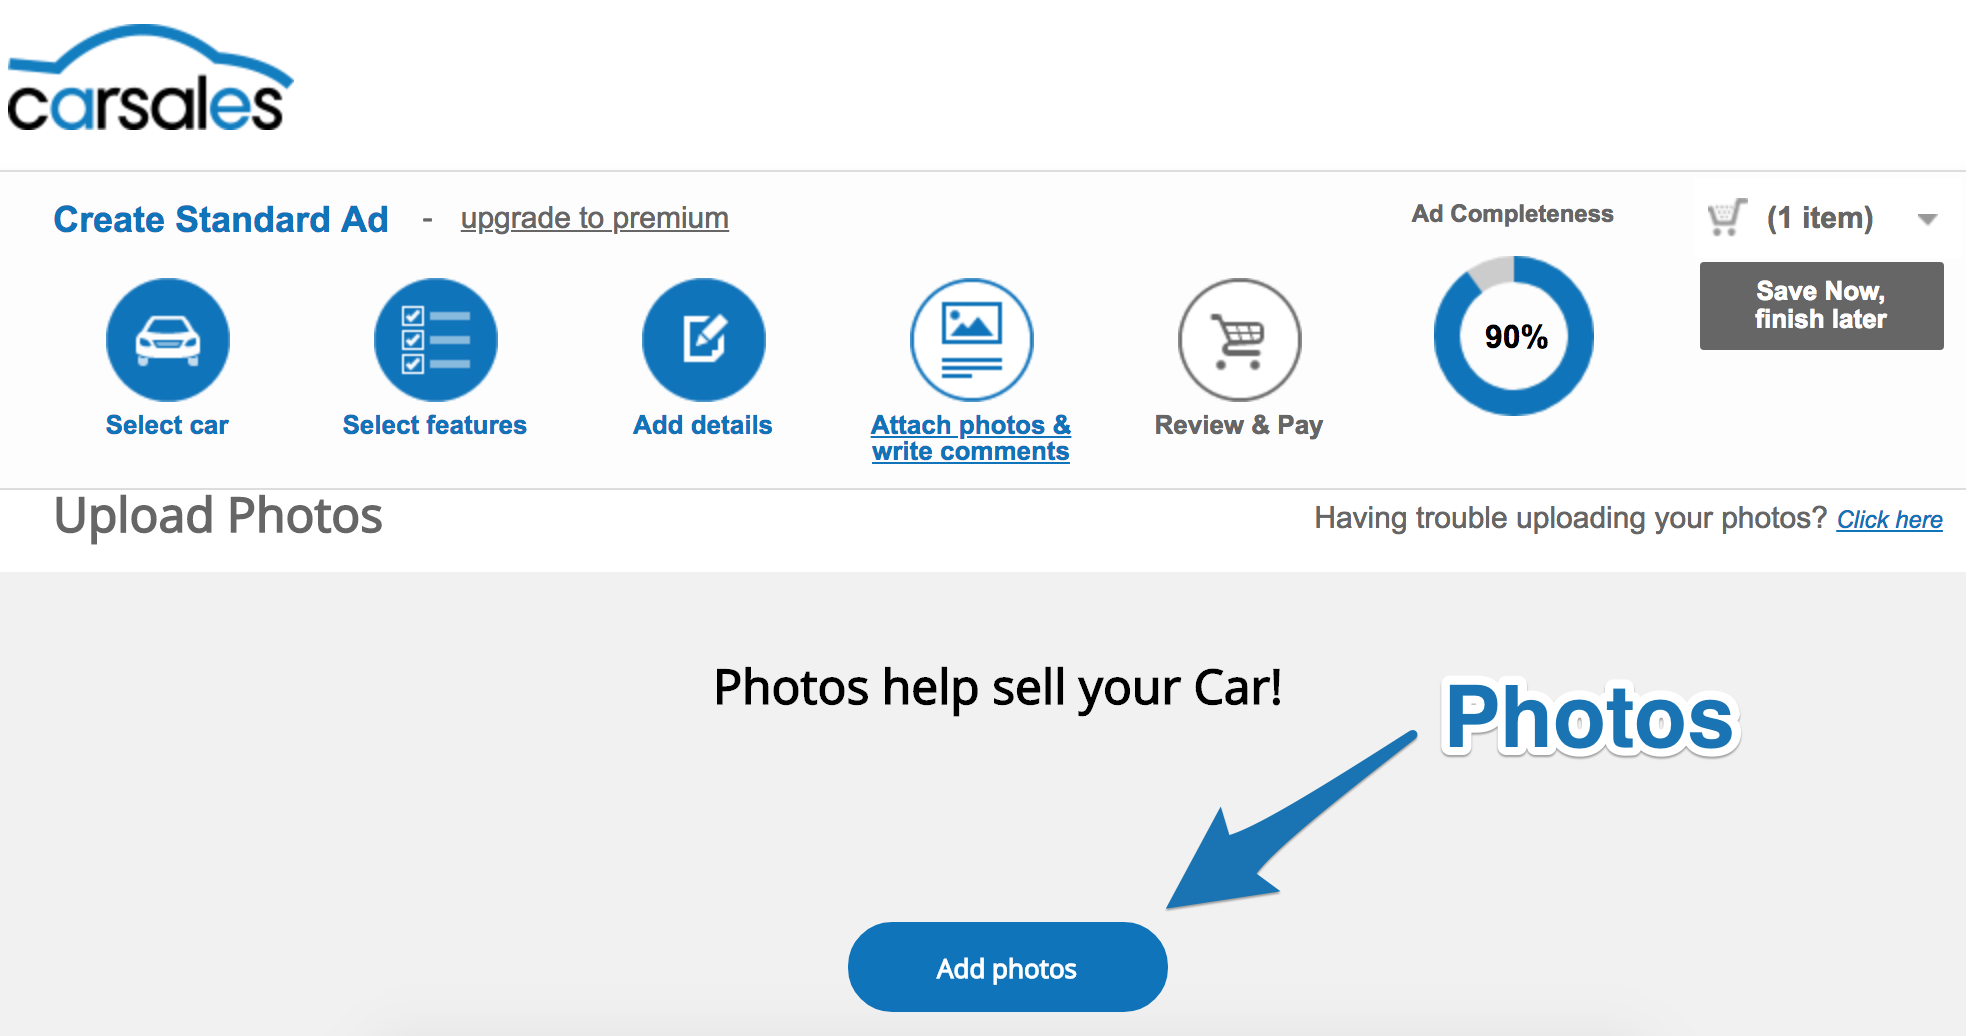 Screenshot showing the "Add photos" page on carsales